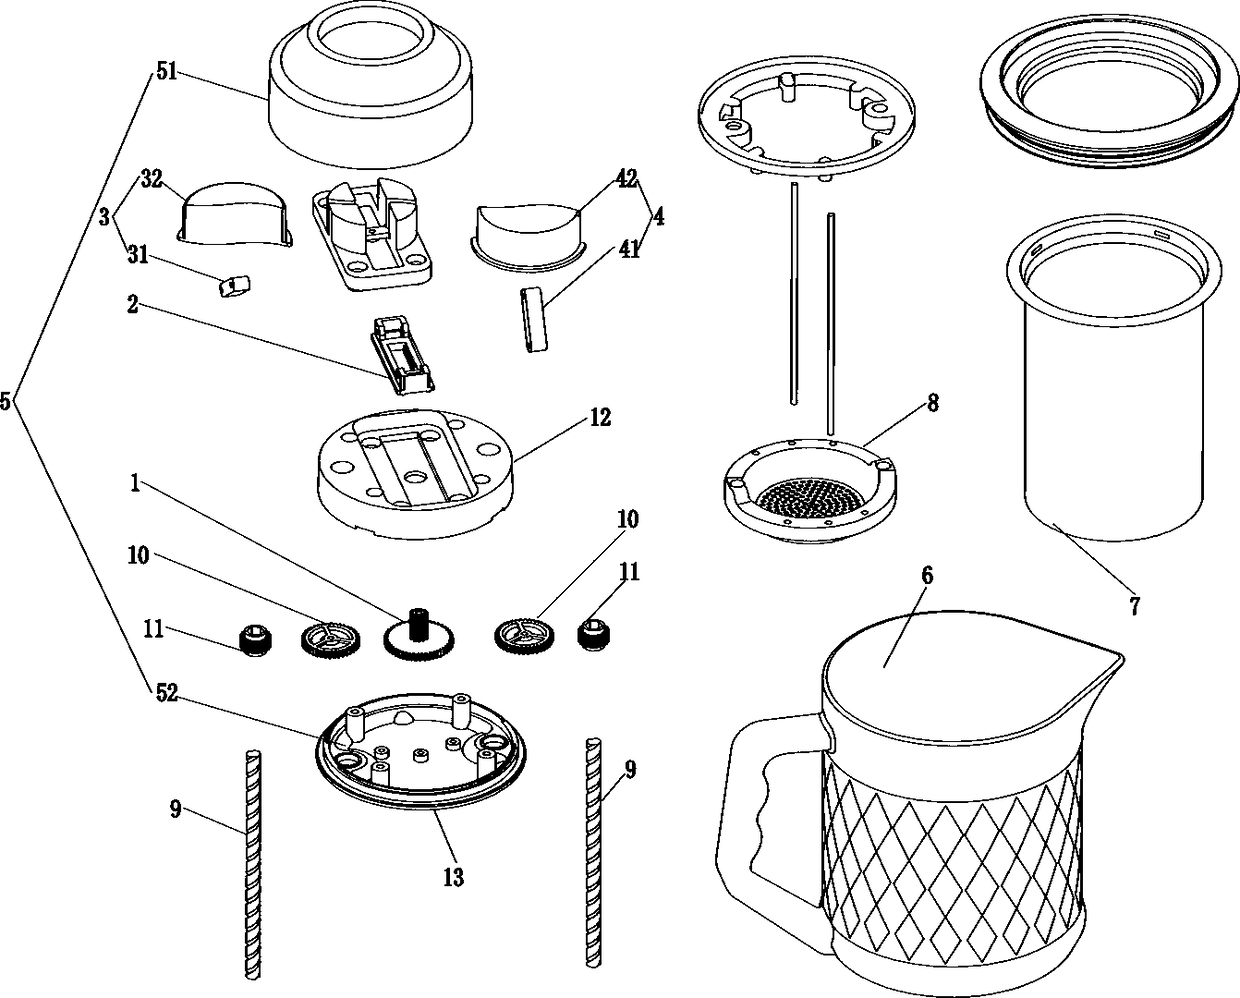 Button mechanism capable of converting pushing into rotation and teapot with mechanism